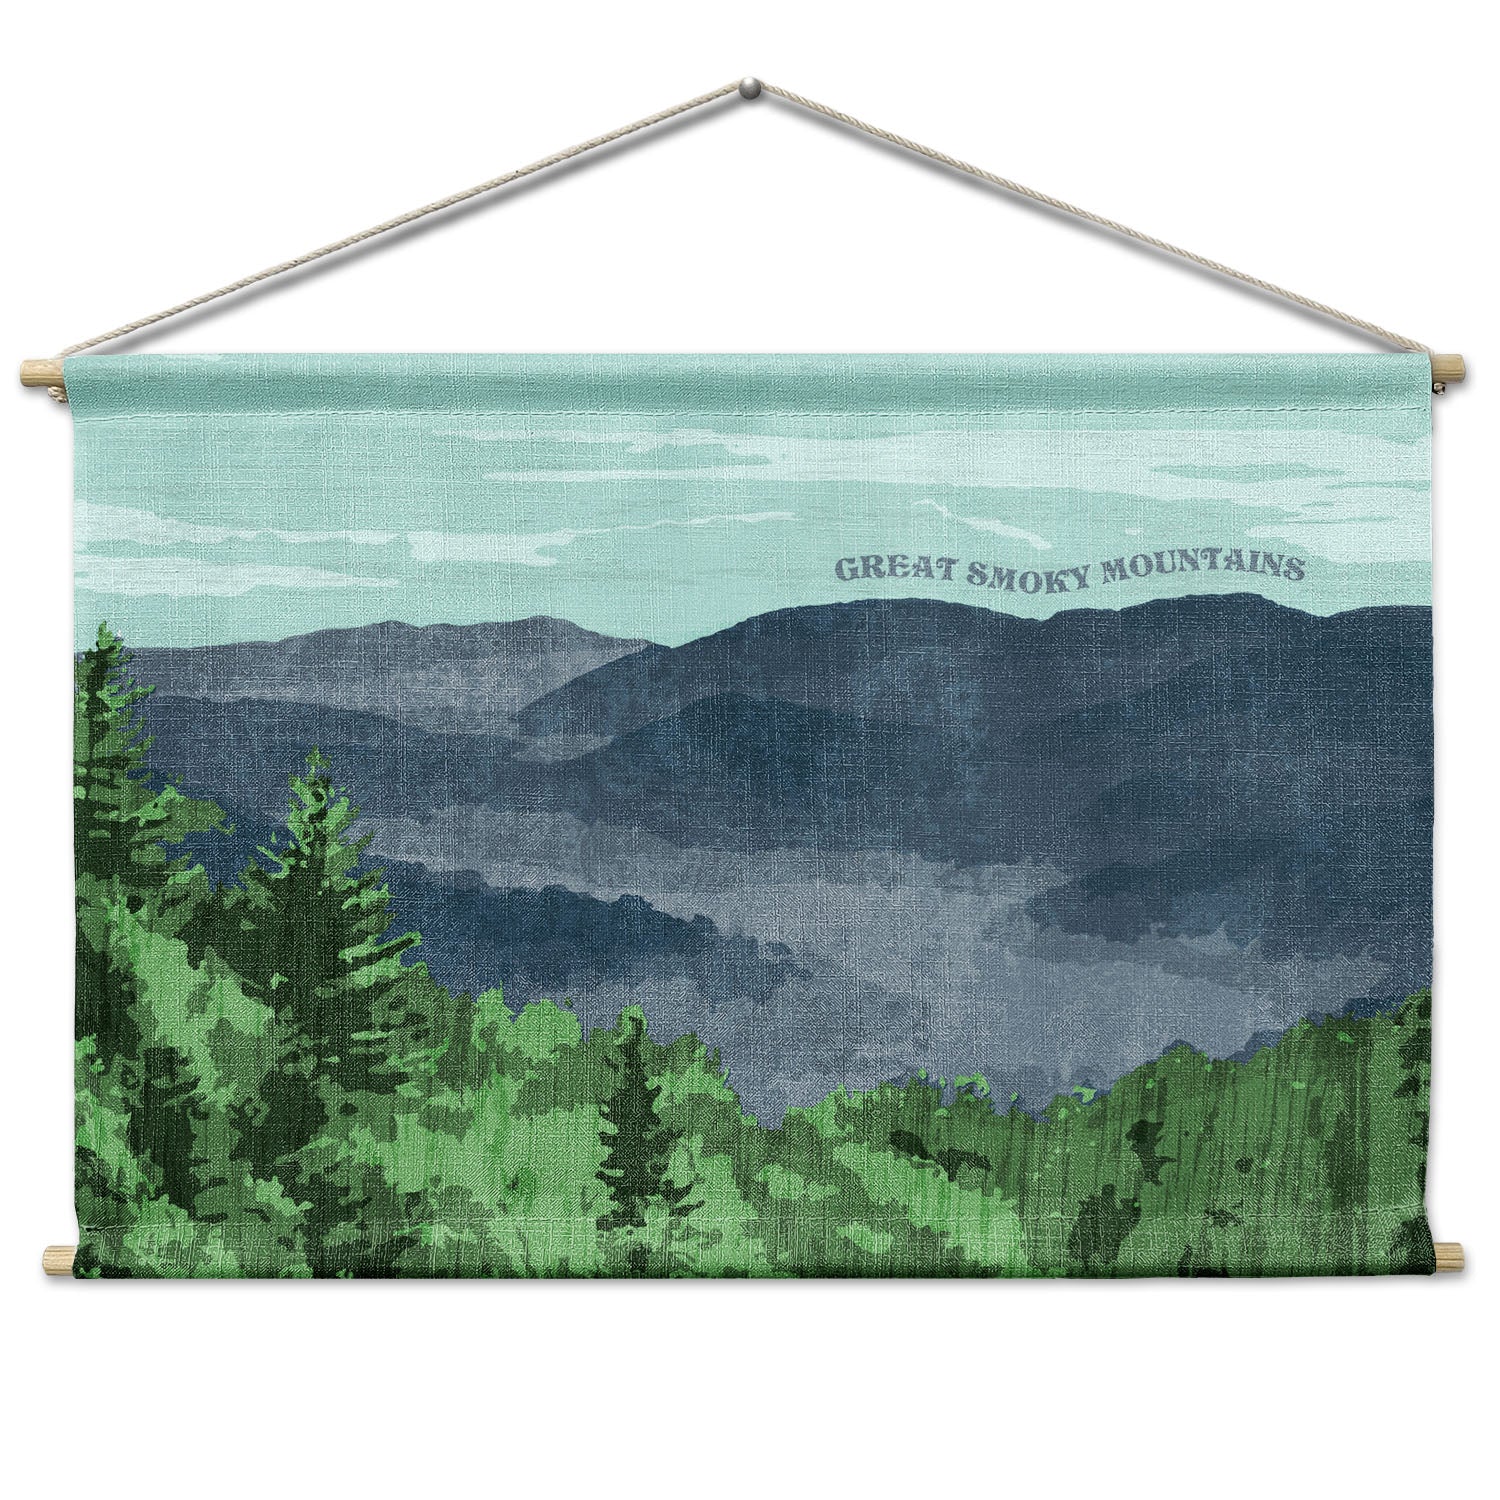 Great Smoky Mountains National Park Abstract Landscape Wall Hanging - Natural -  - Knotty Tie Co.